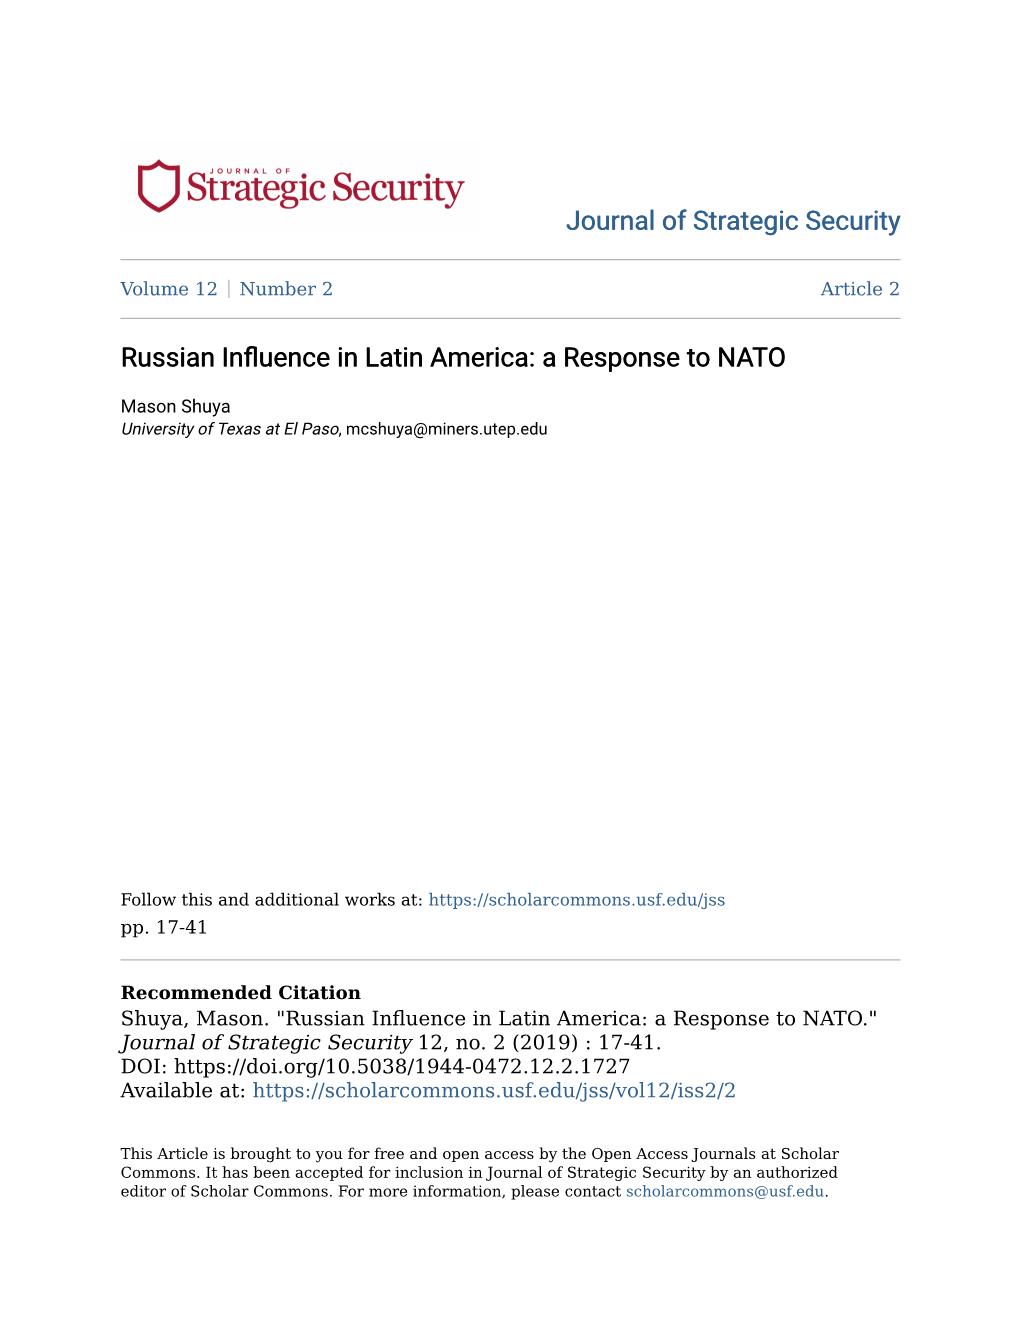 Russian Influence in Latin America: a Response to NATO." Journal of Strategic Security 12, No